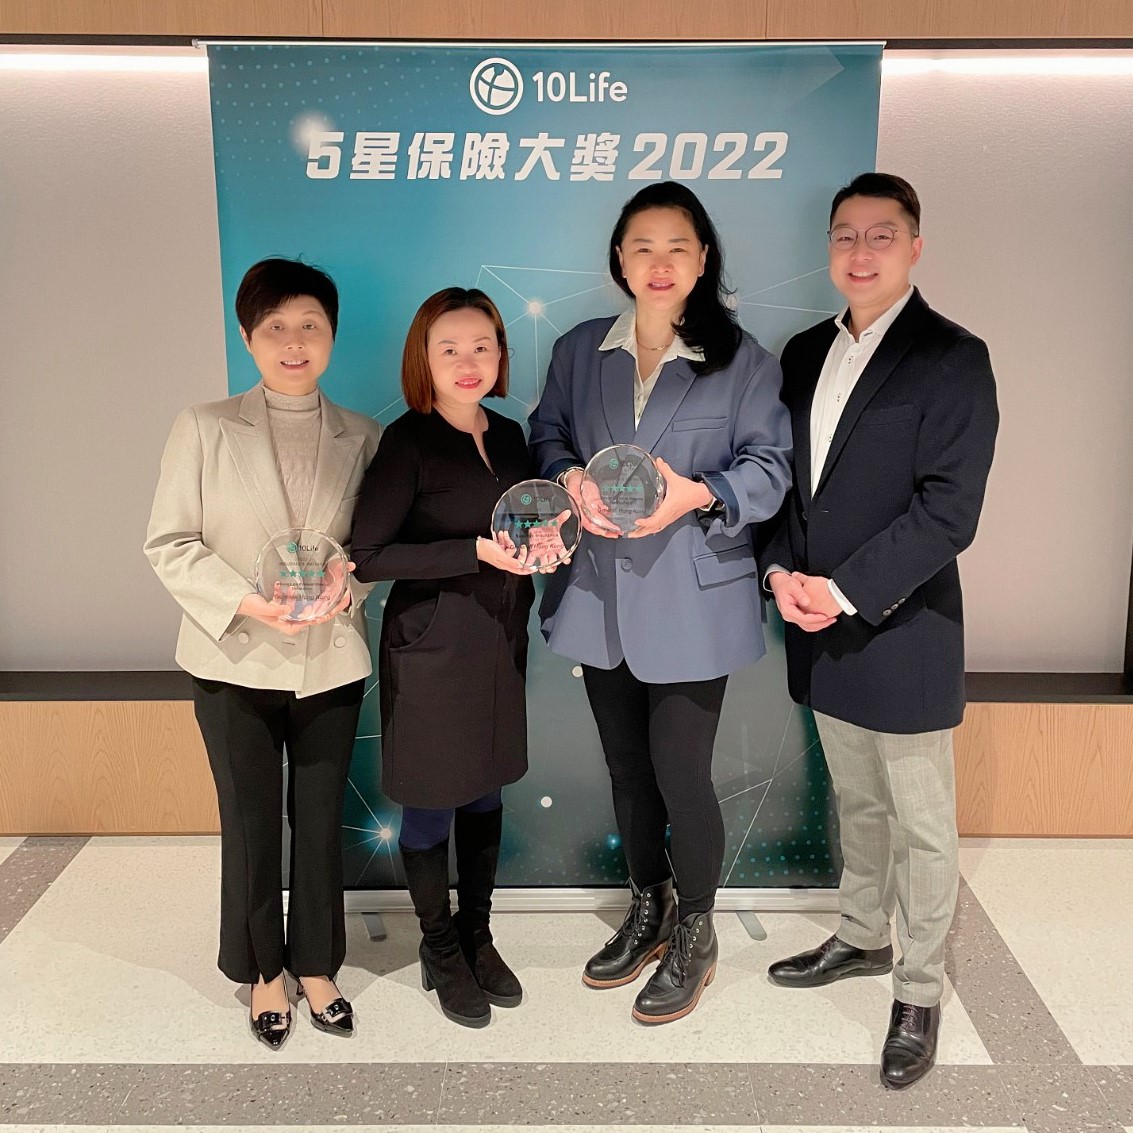 (From left) Ms. Quinney Tang, Division Head, Product Development, Ms. Ady Law, Chief Distribution and Marketing Officer and Ms. Cecilia Chang, Chief Executive Officer of Generali Hong Kong received the trophies from Thomson Ho, Co-Founder of 10Life.